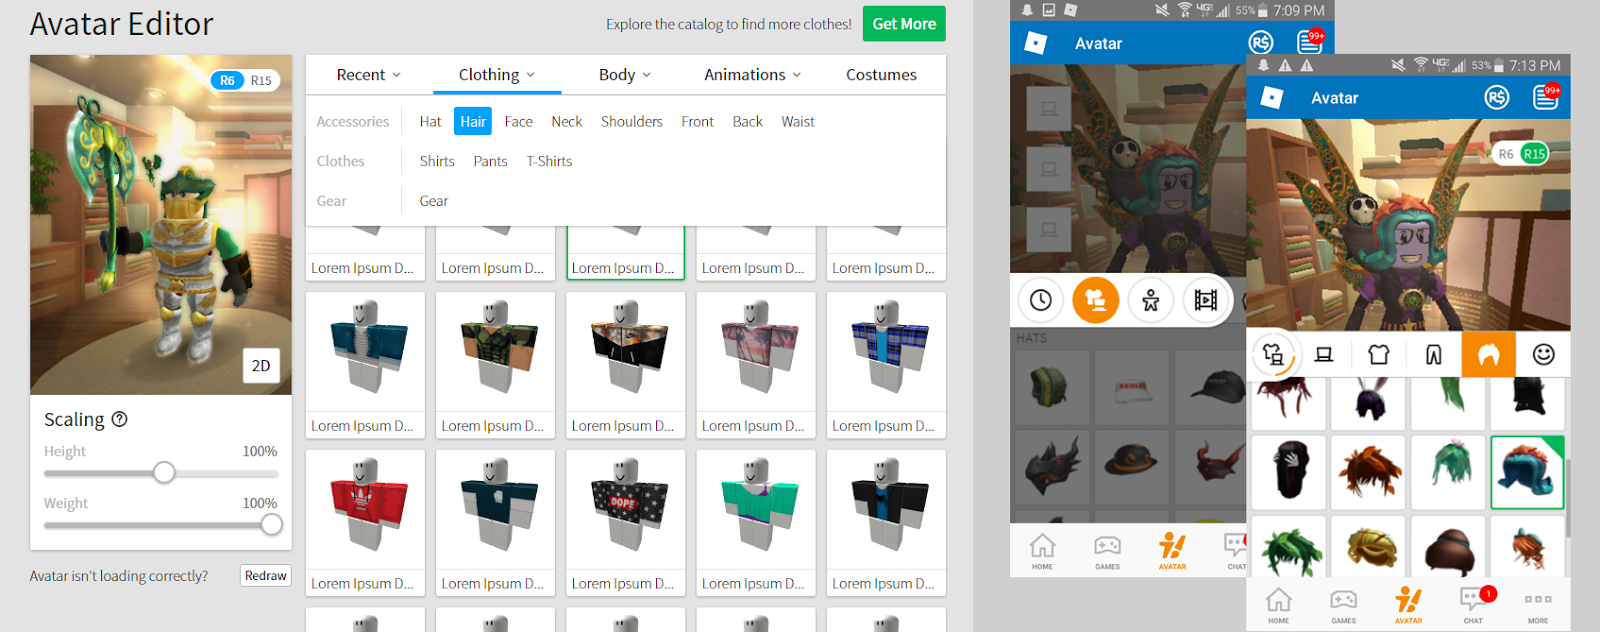 Avatar Editor Update Roblox Blog Players can use their avatars to interact with the world around them, and generally move around games. avatar editor update roblox blog